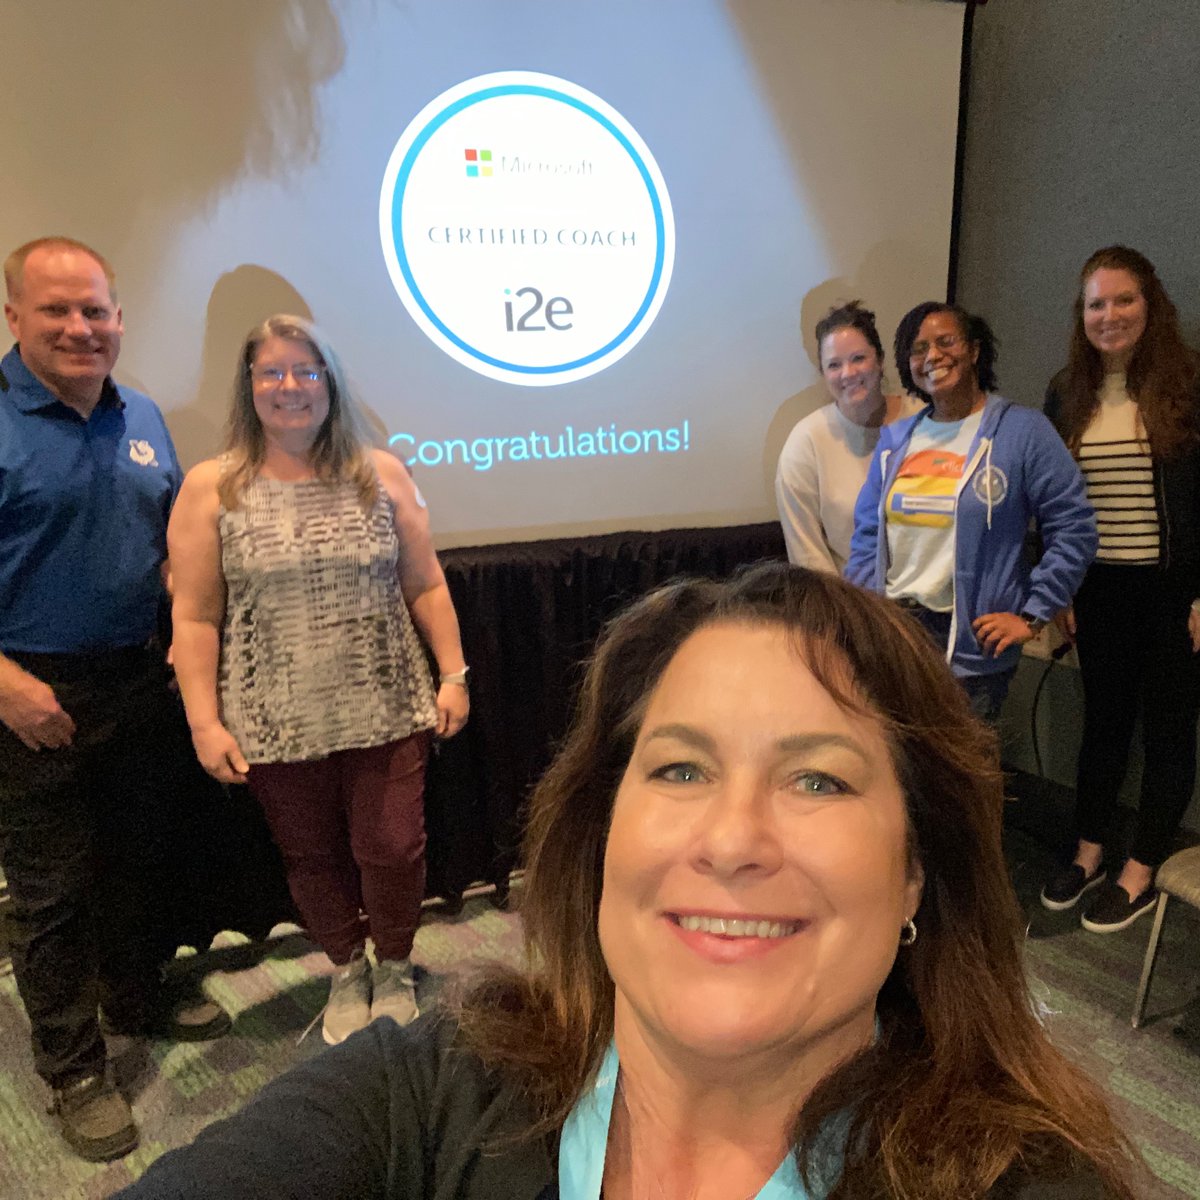 What an amazing few days of PD! #MicrosoftCertifiedCoach with @i2eEDU -Thank you, Kim and the Orlando Cohort! #MicrosoftEdu #DigitalTransformation #ChangeAgent #FETC2024